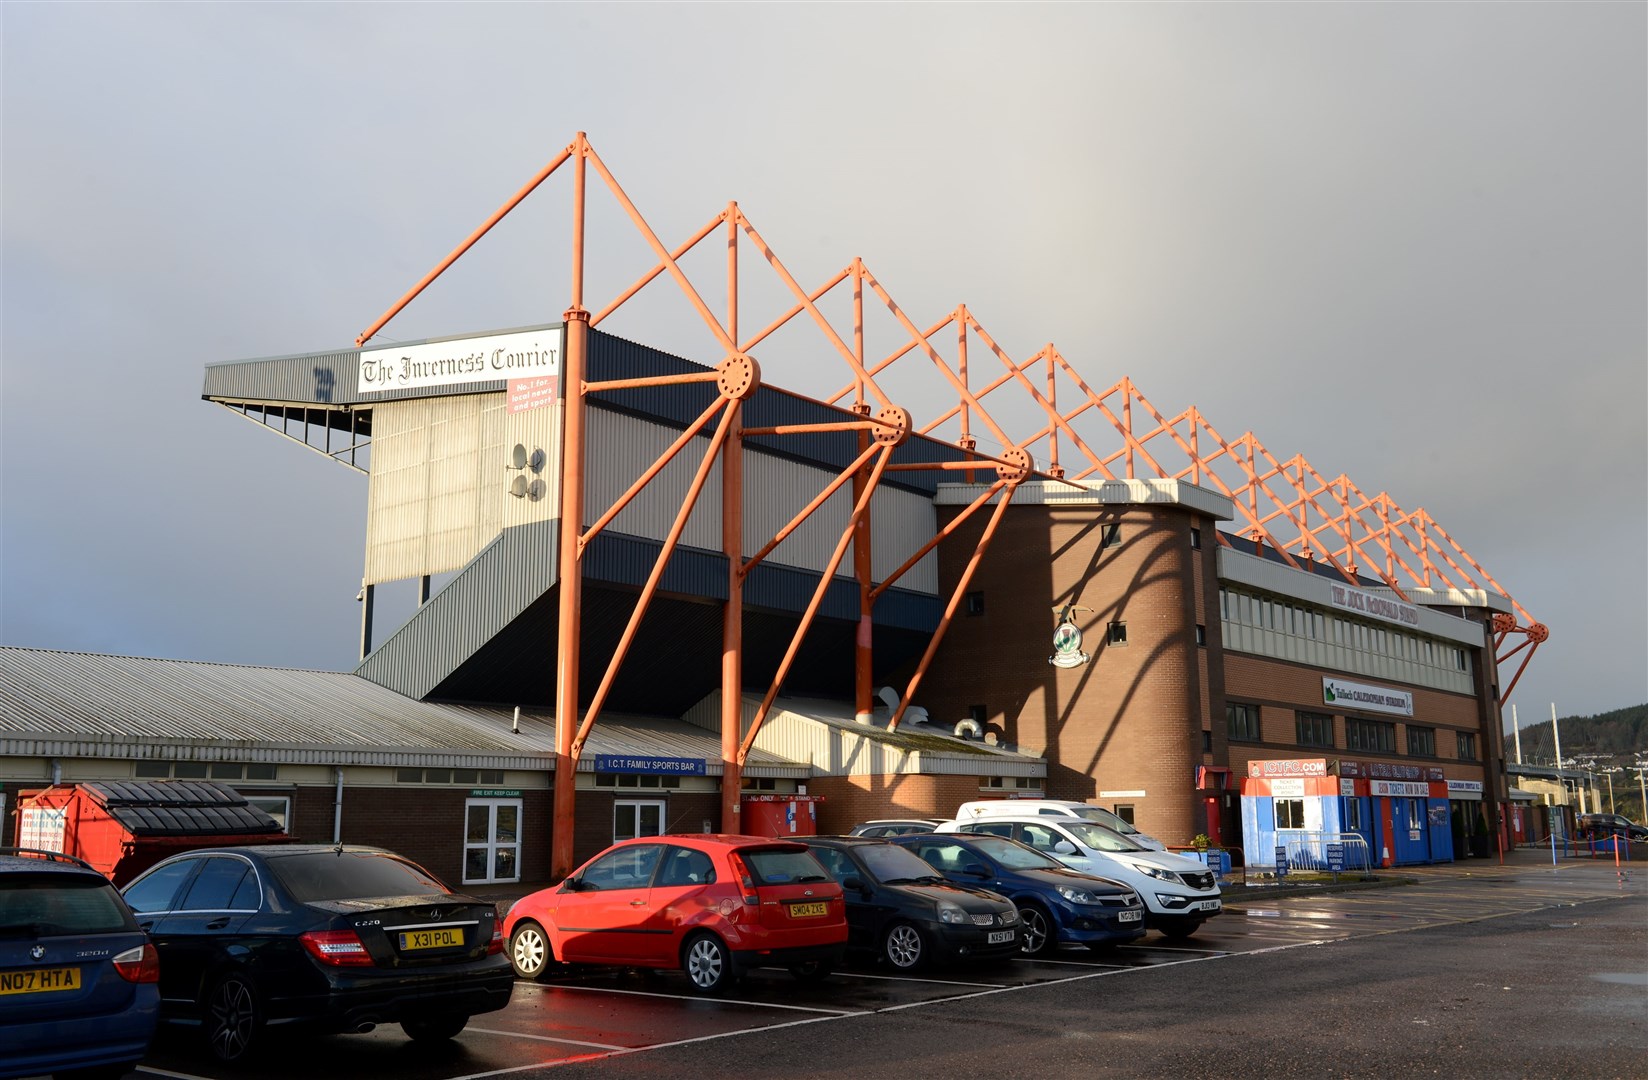 Caledonian Stadium in Inverness, where the latest incident took place during the Irn-Bru Cup final.